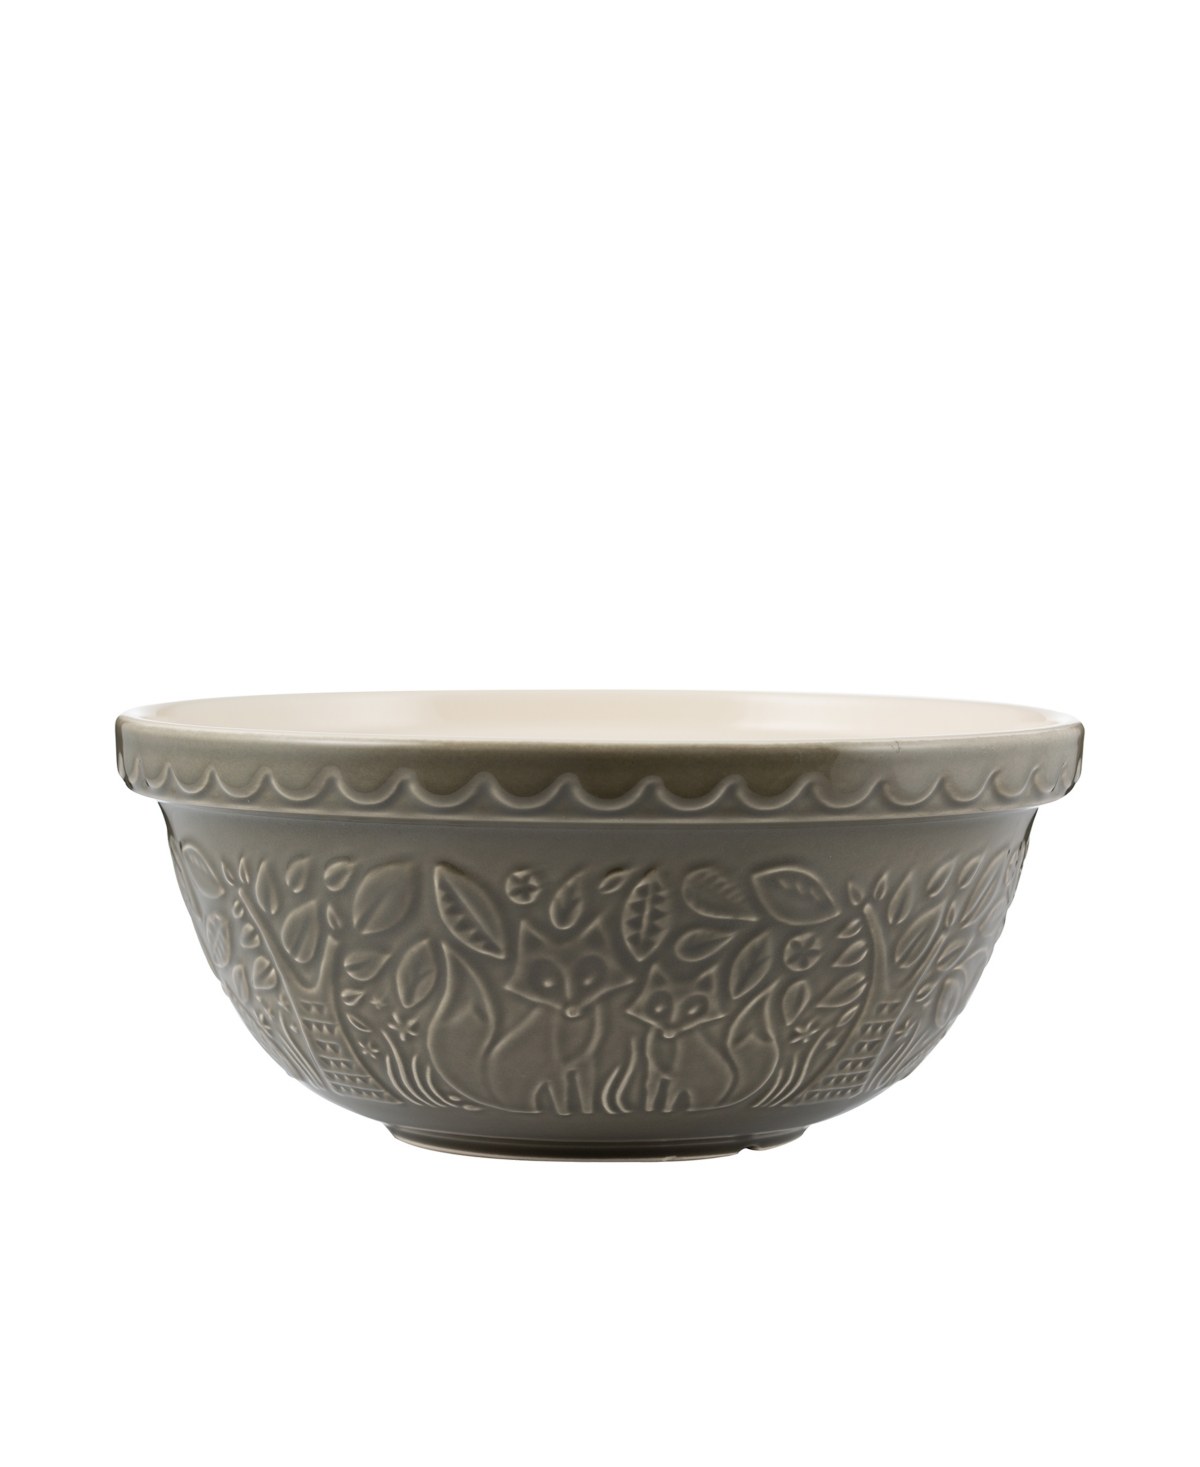 Mason Cash In The Forest S12 Mixing Bowl In Gray